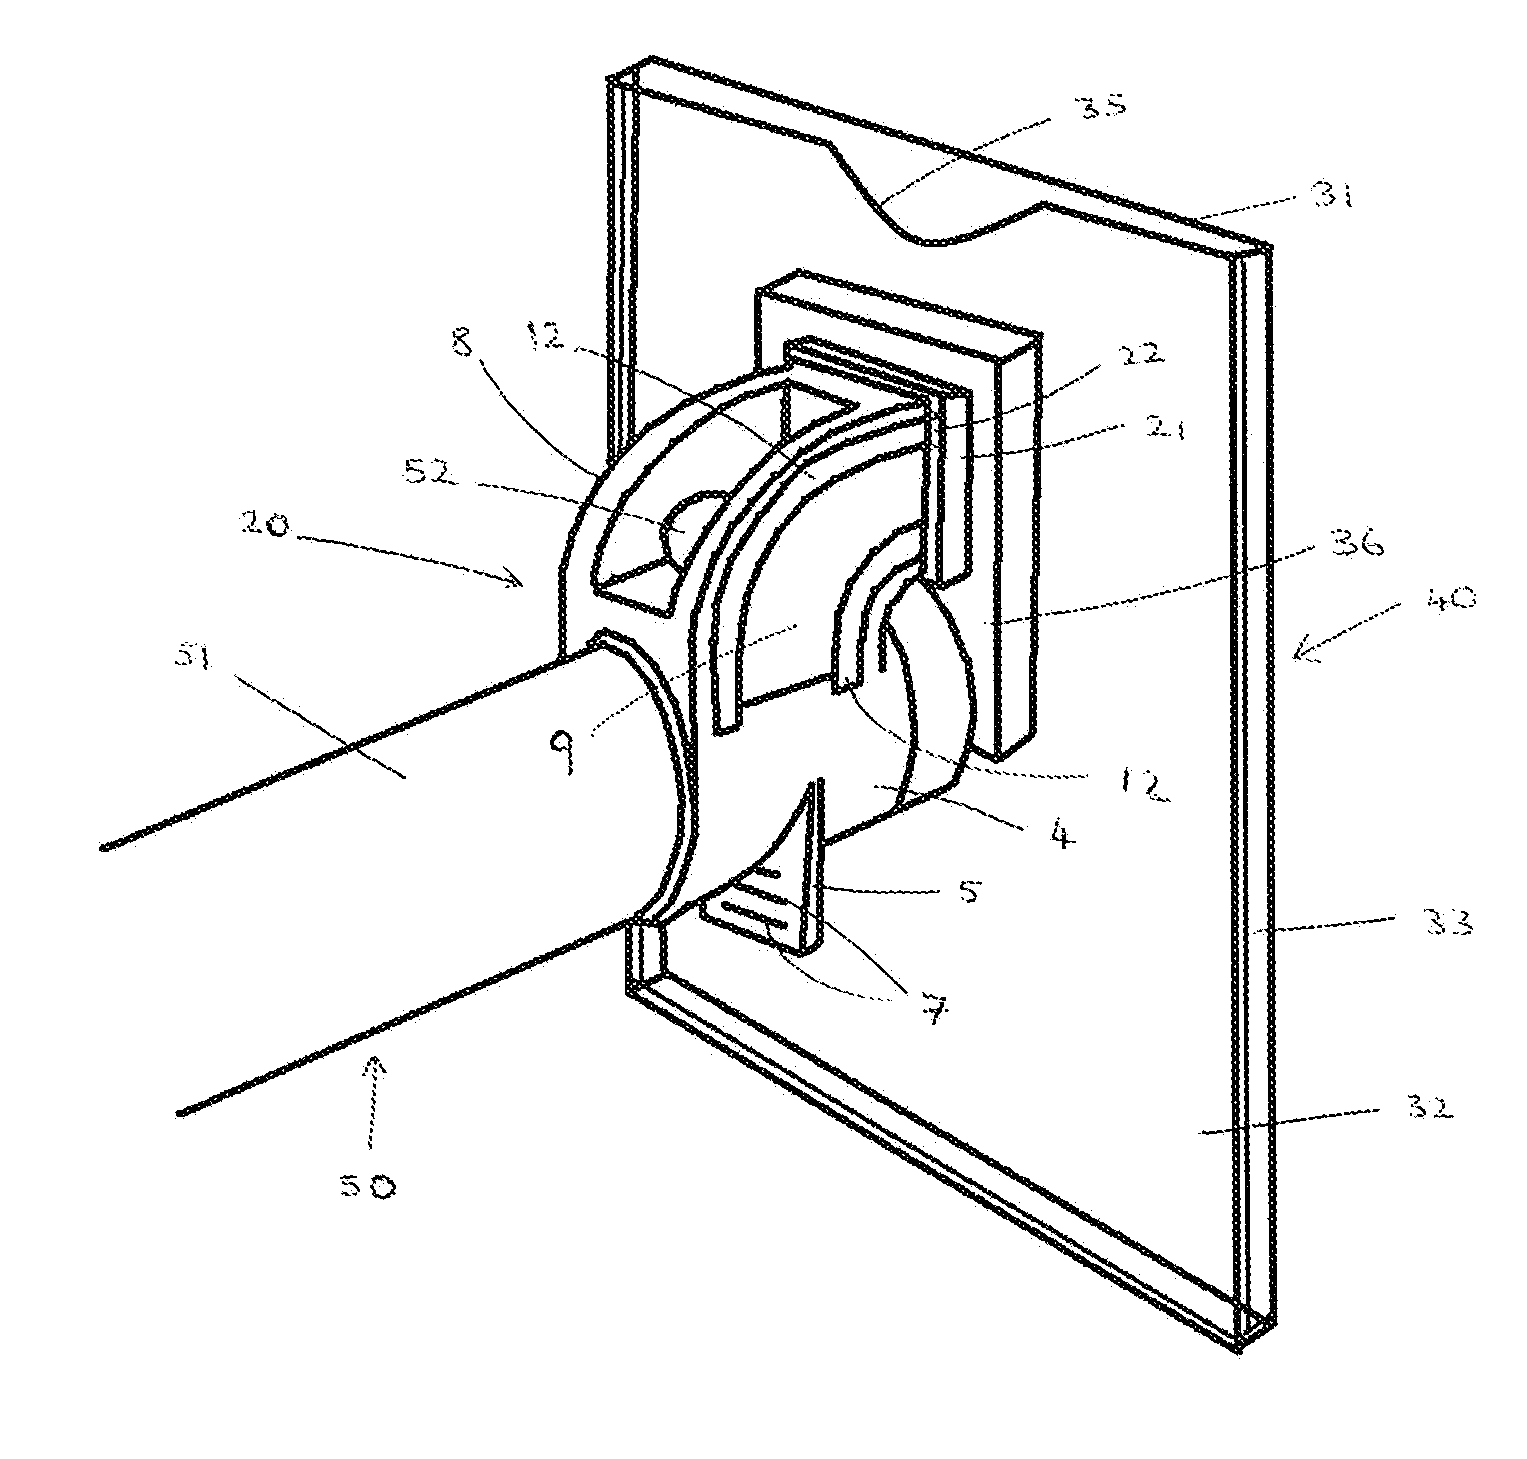 Device for Displaying a Graphic Holder